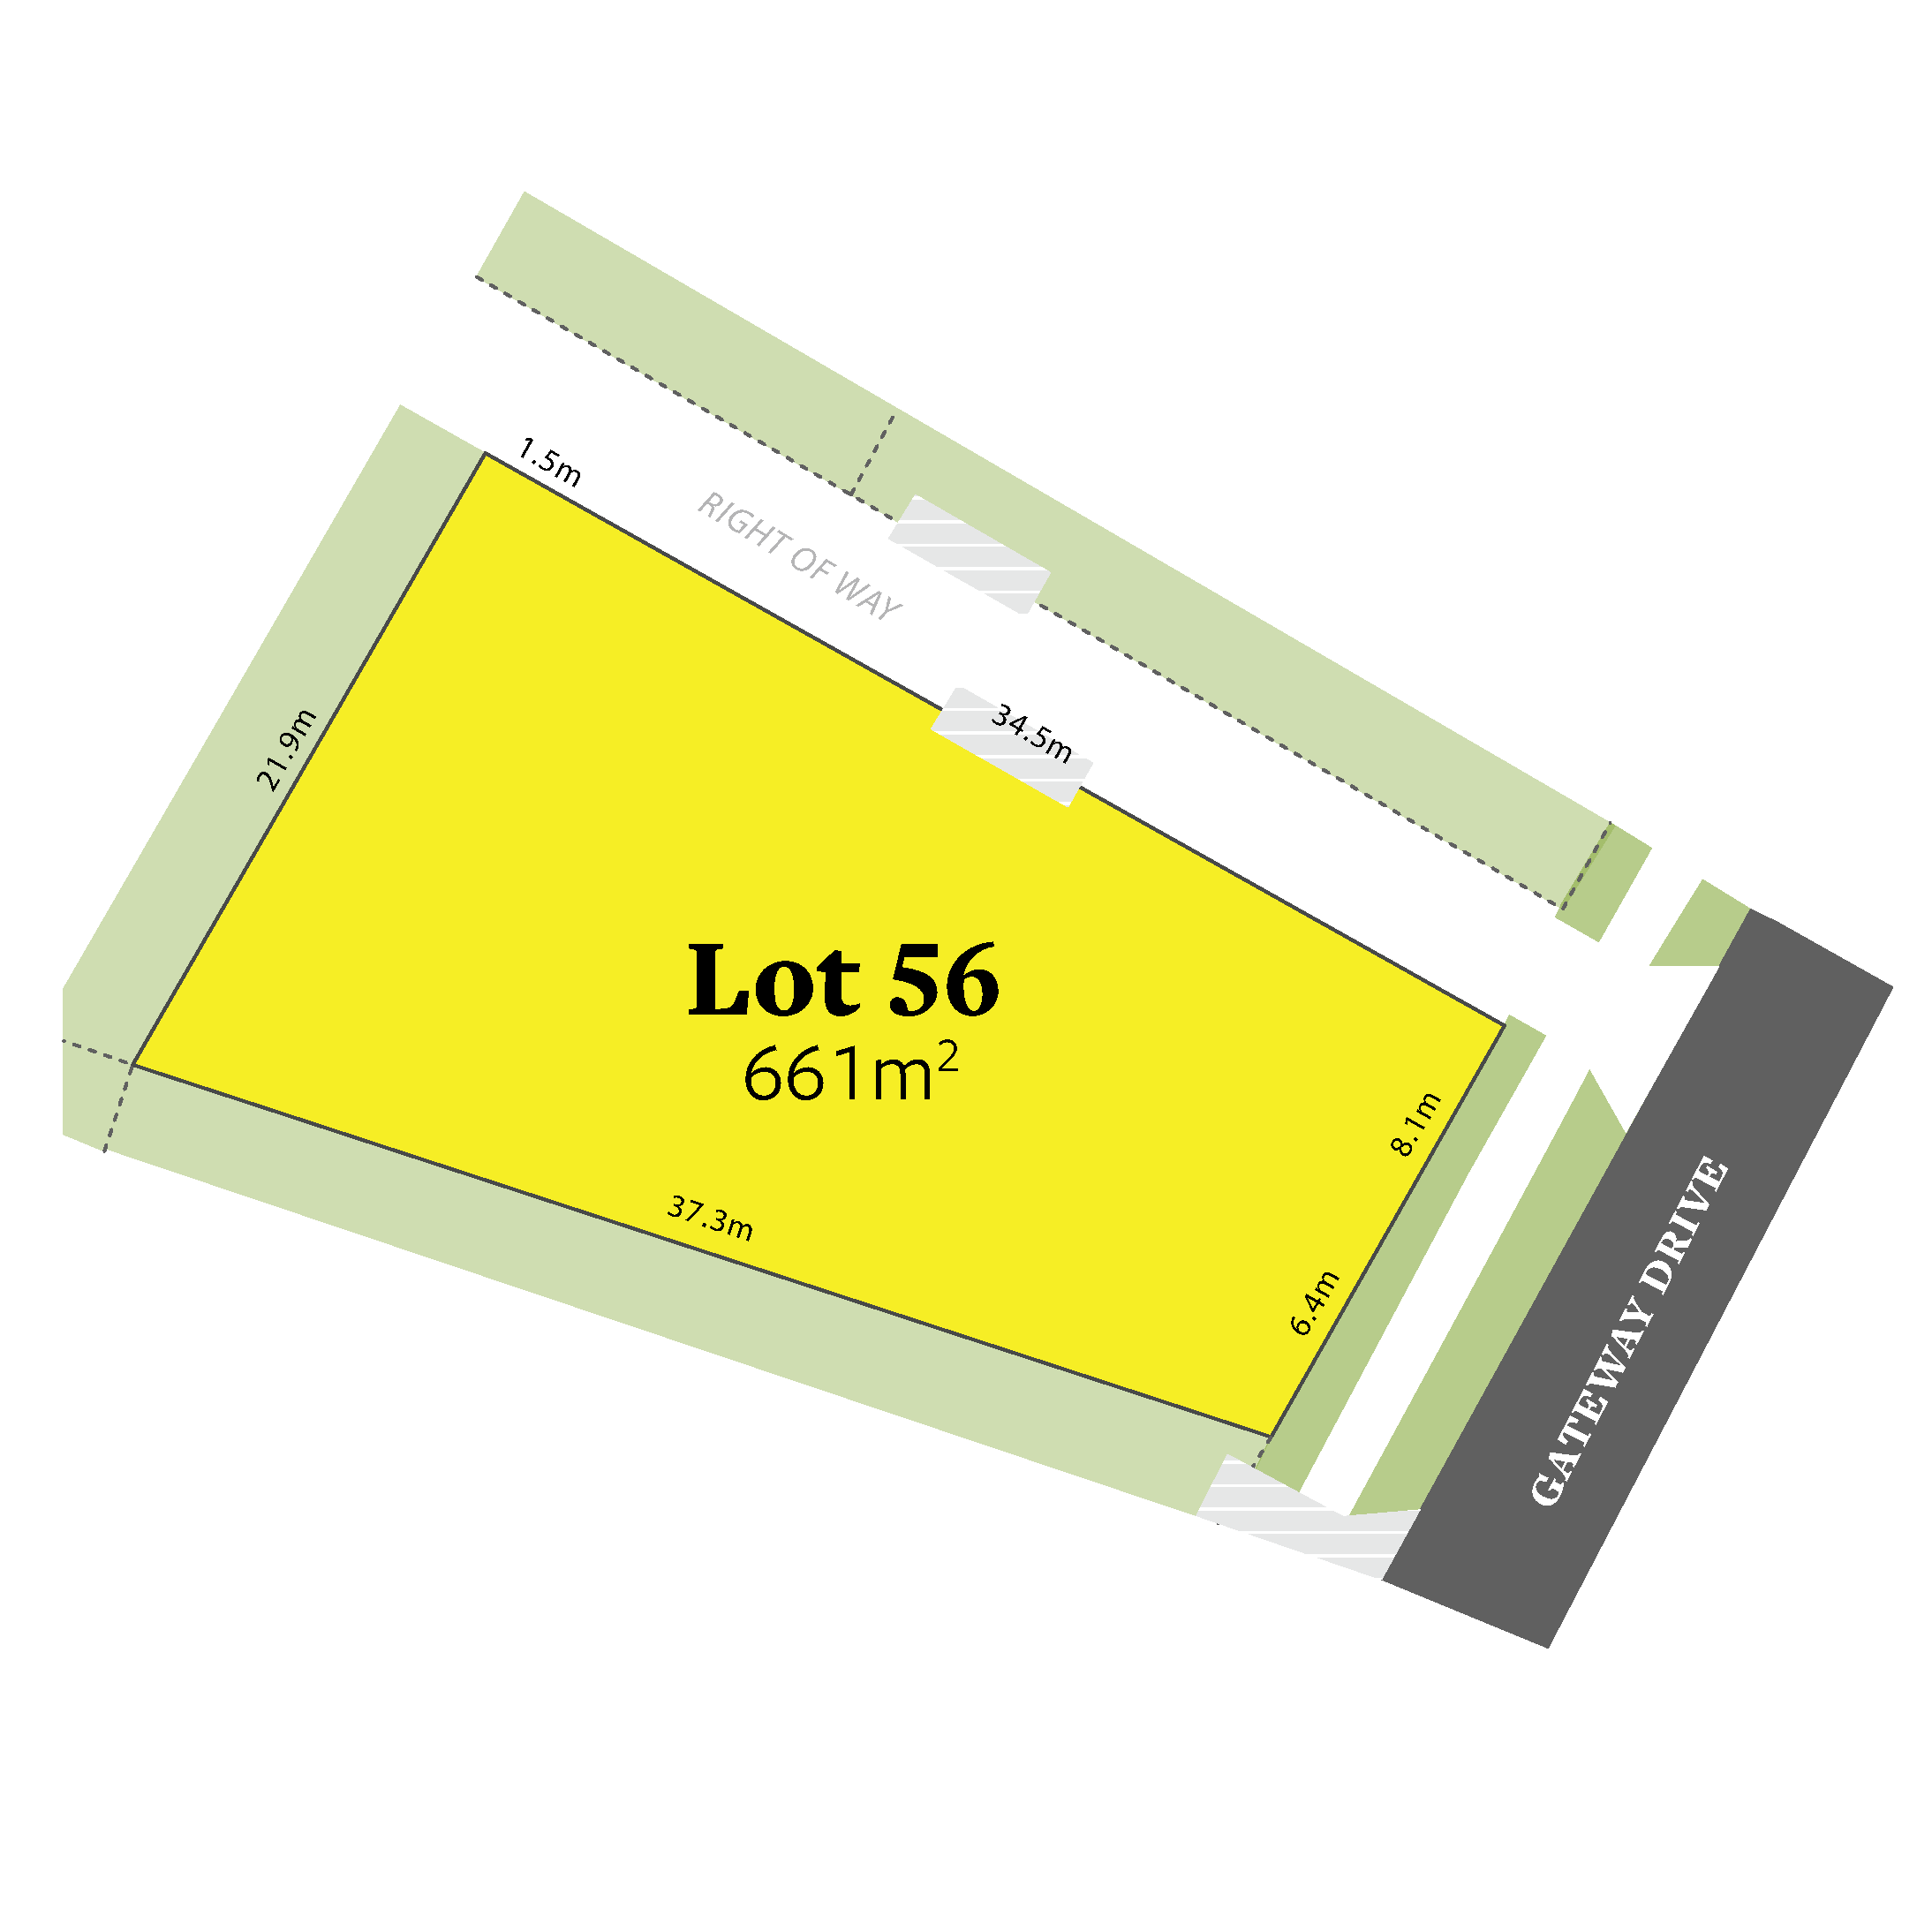 Image of Lot 56